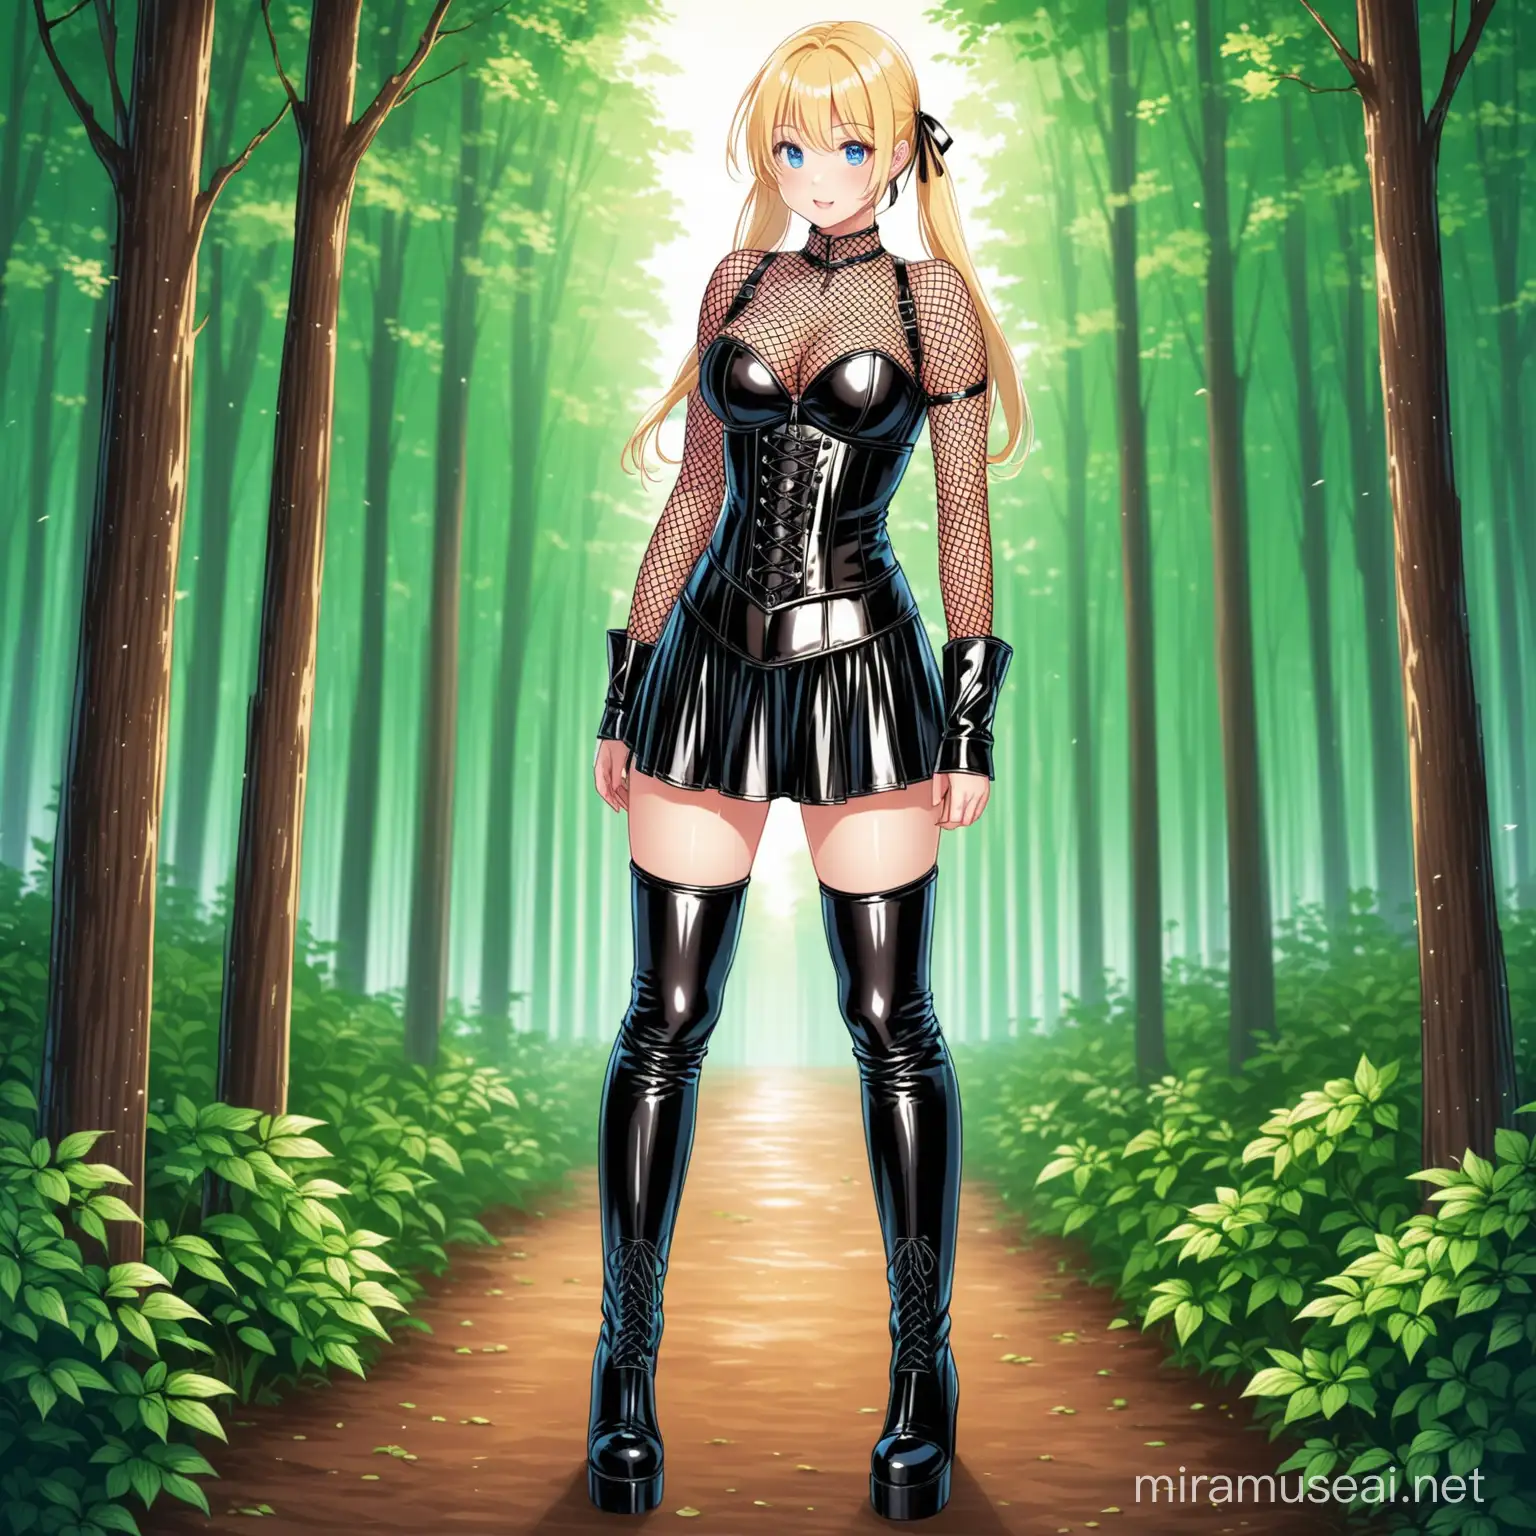 Blonde Woman in Edgy Attire Stands Amidst Enchanted Forest